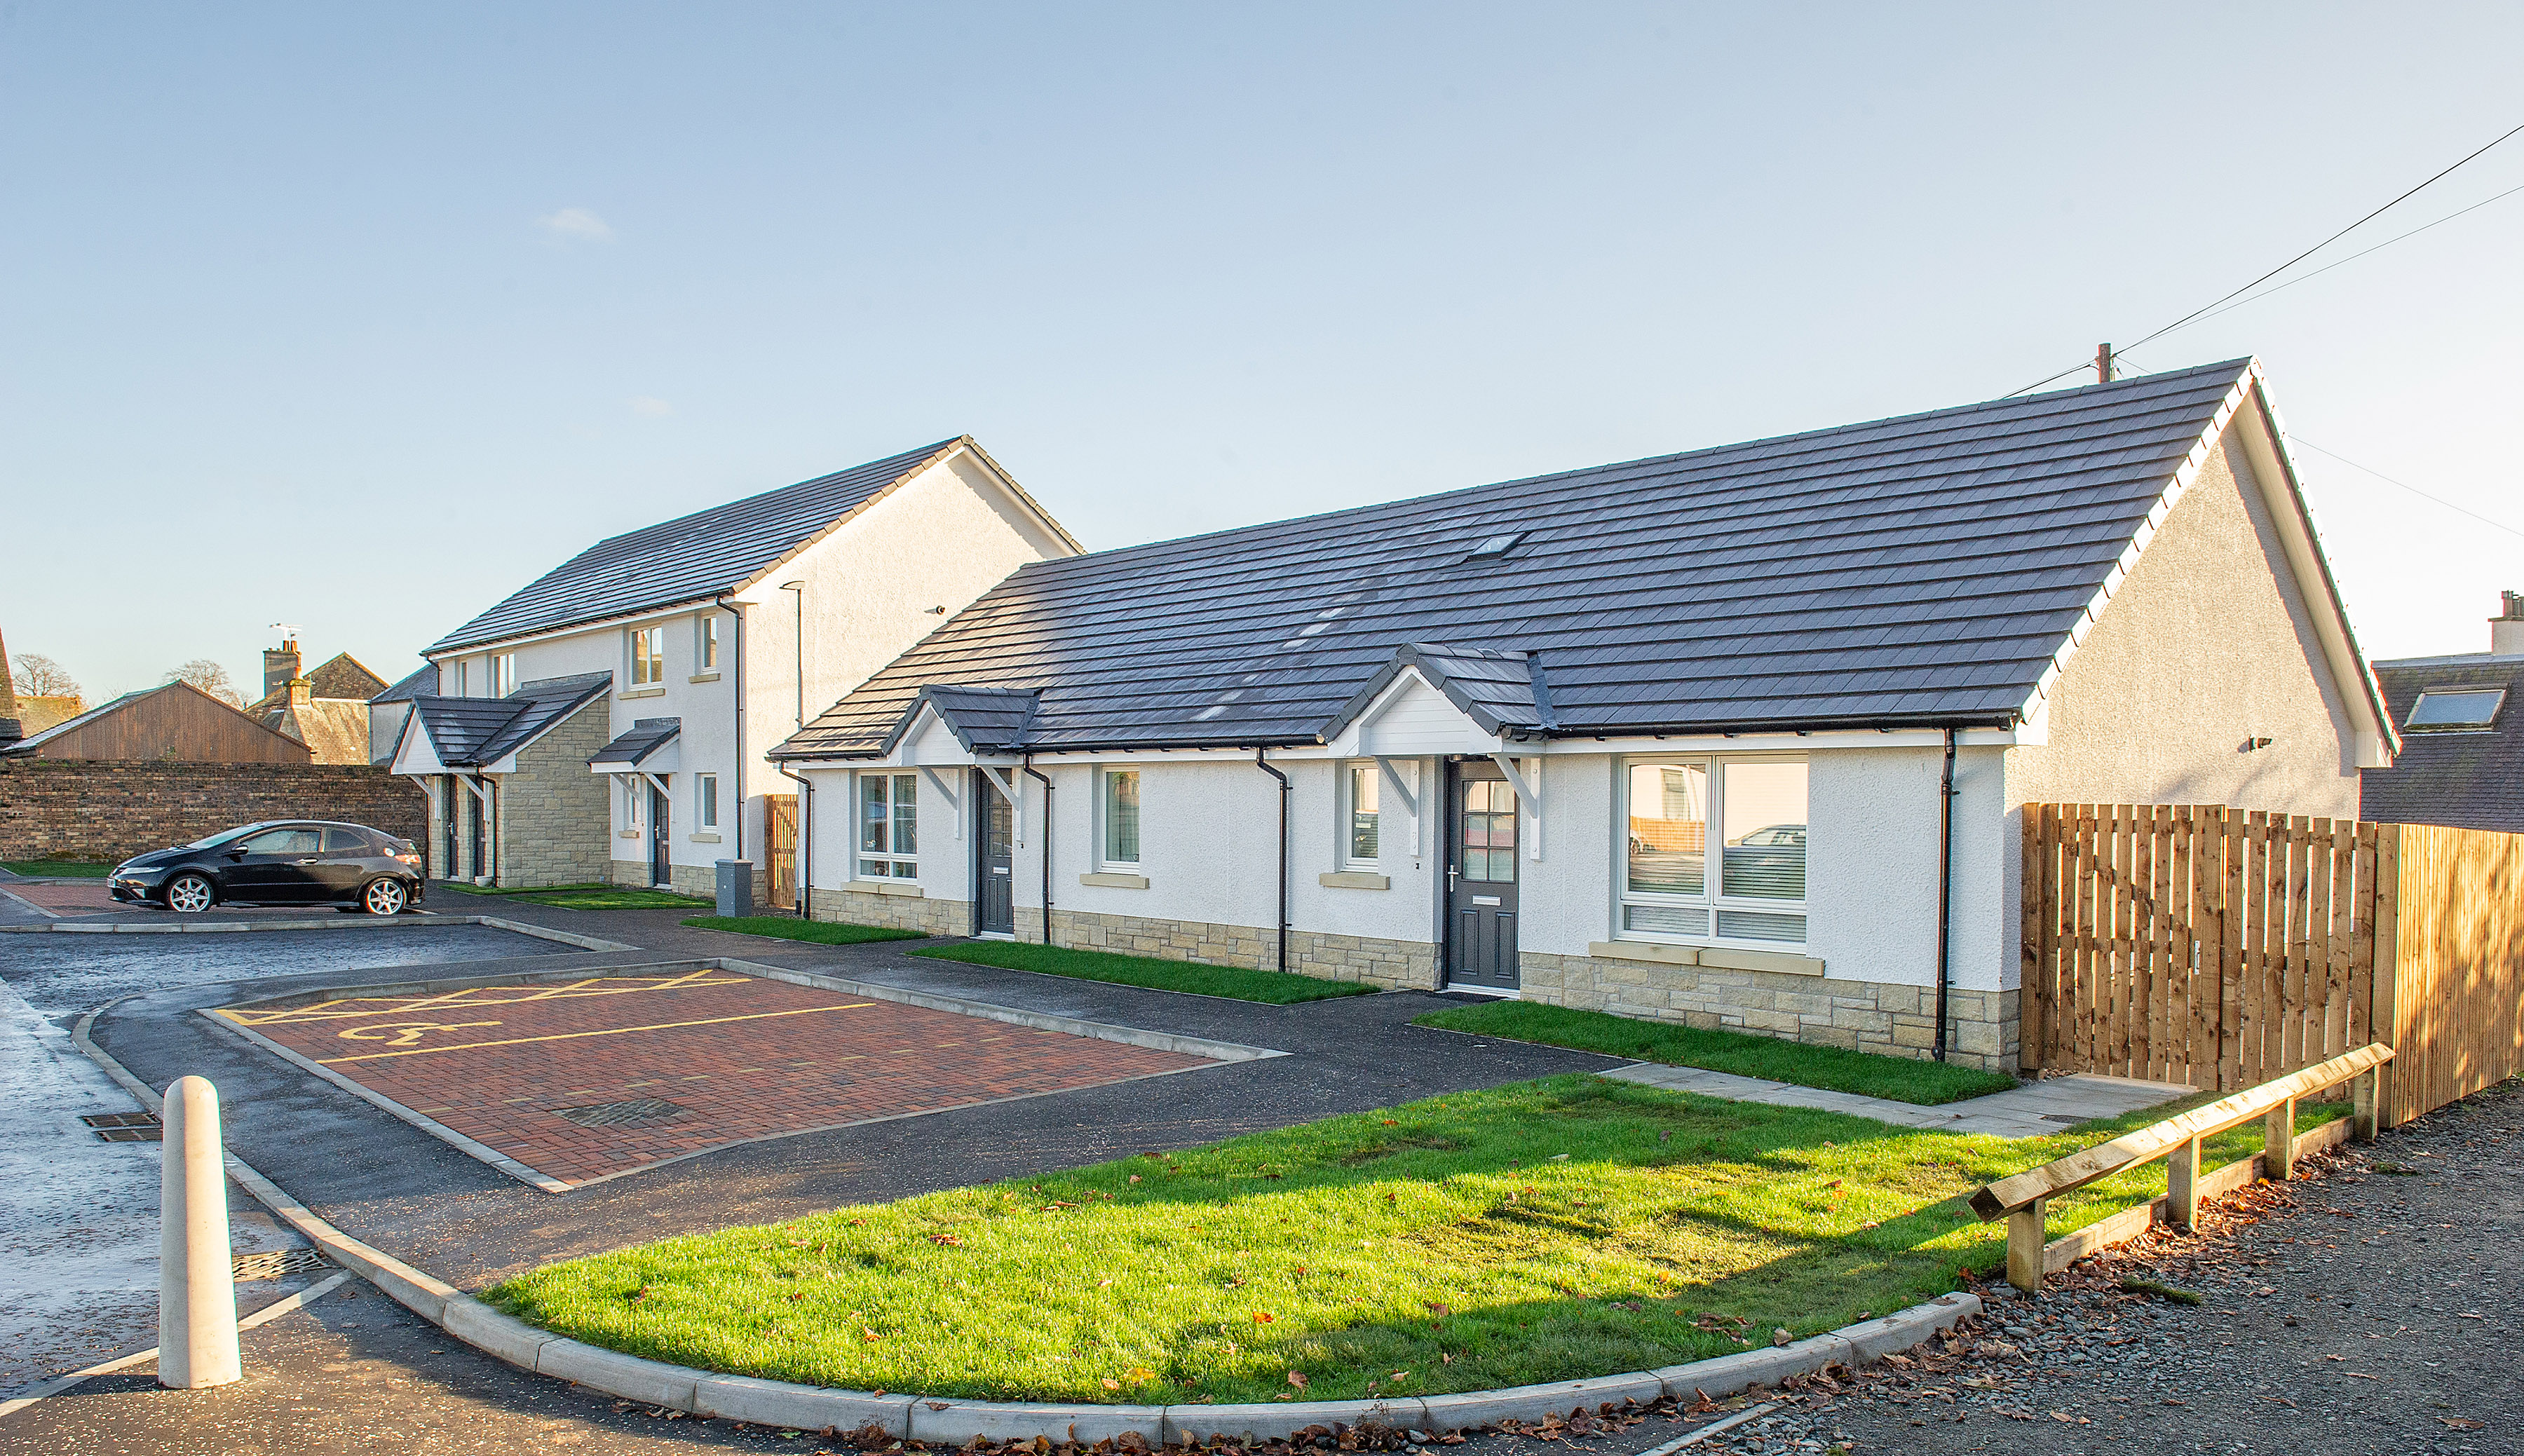 Housing association unveils new homes in Doune